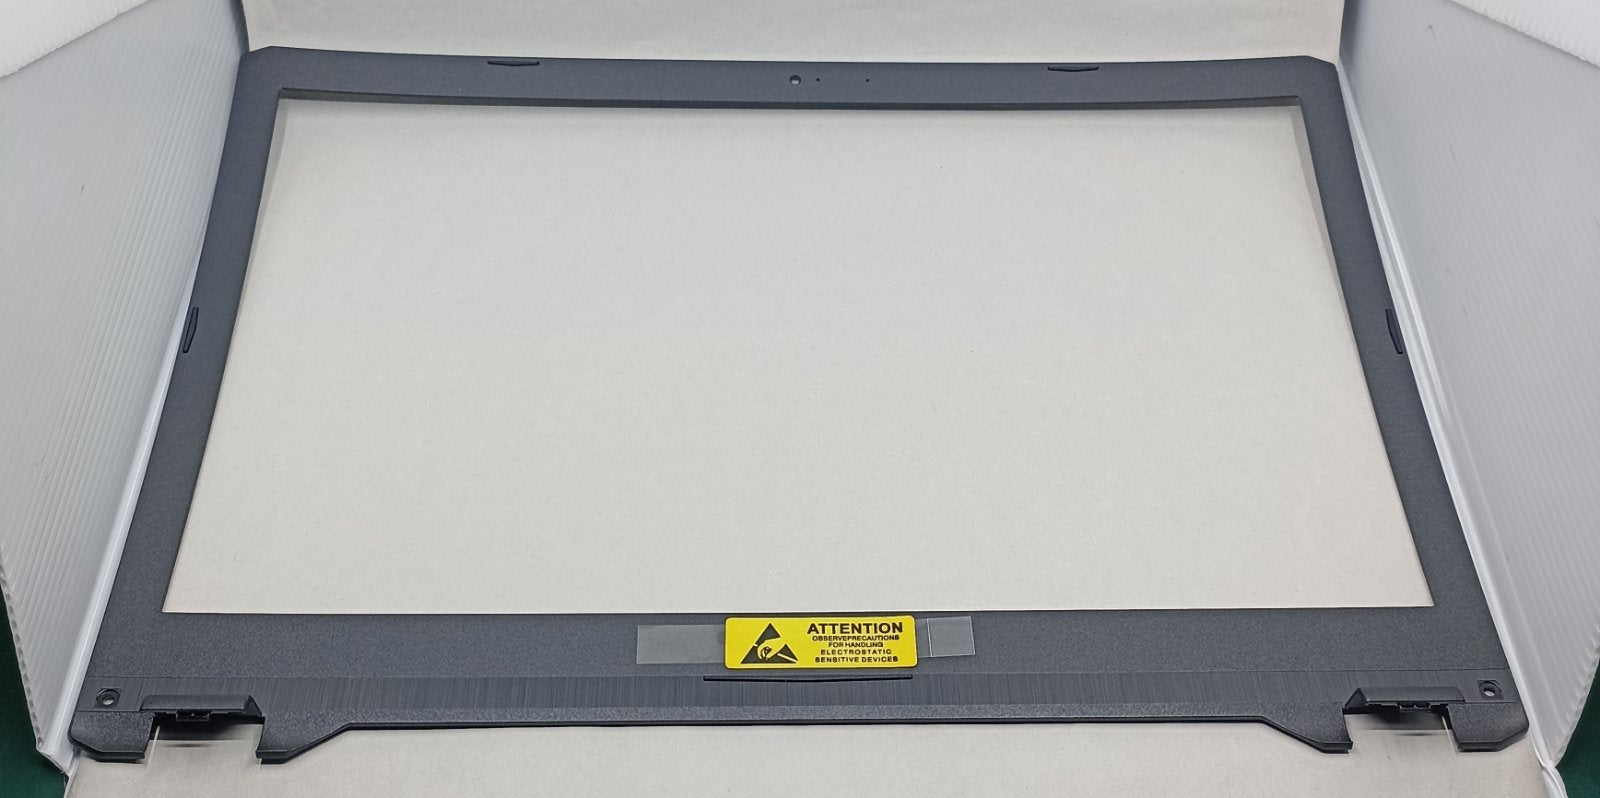 Replacement LCD Bezel for Asus M570DD WL